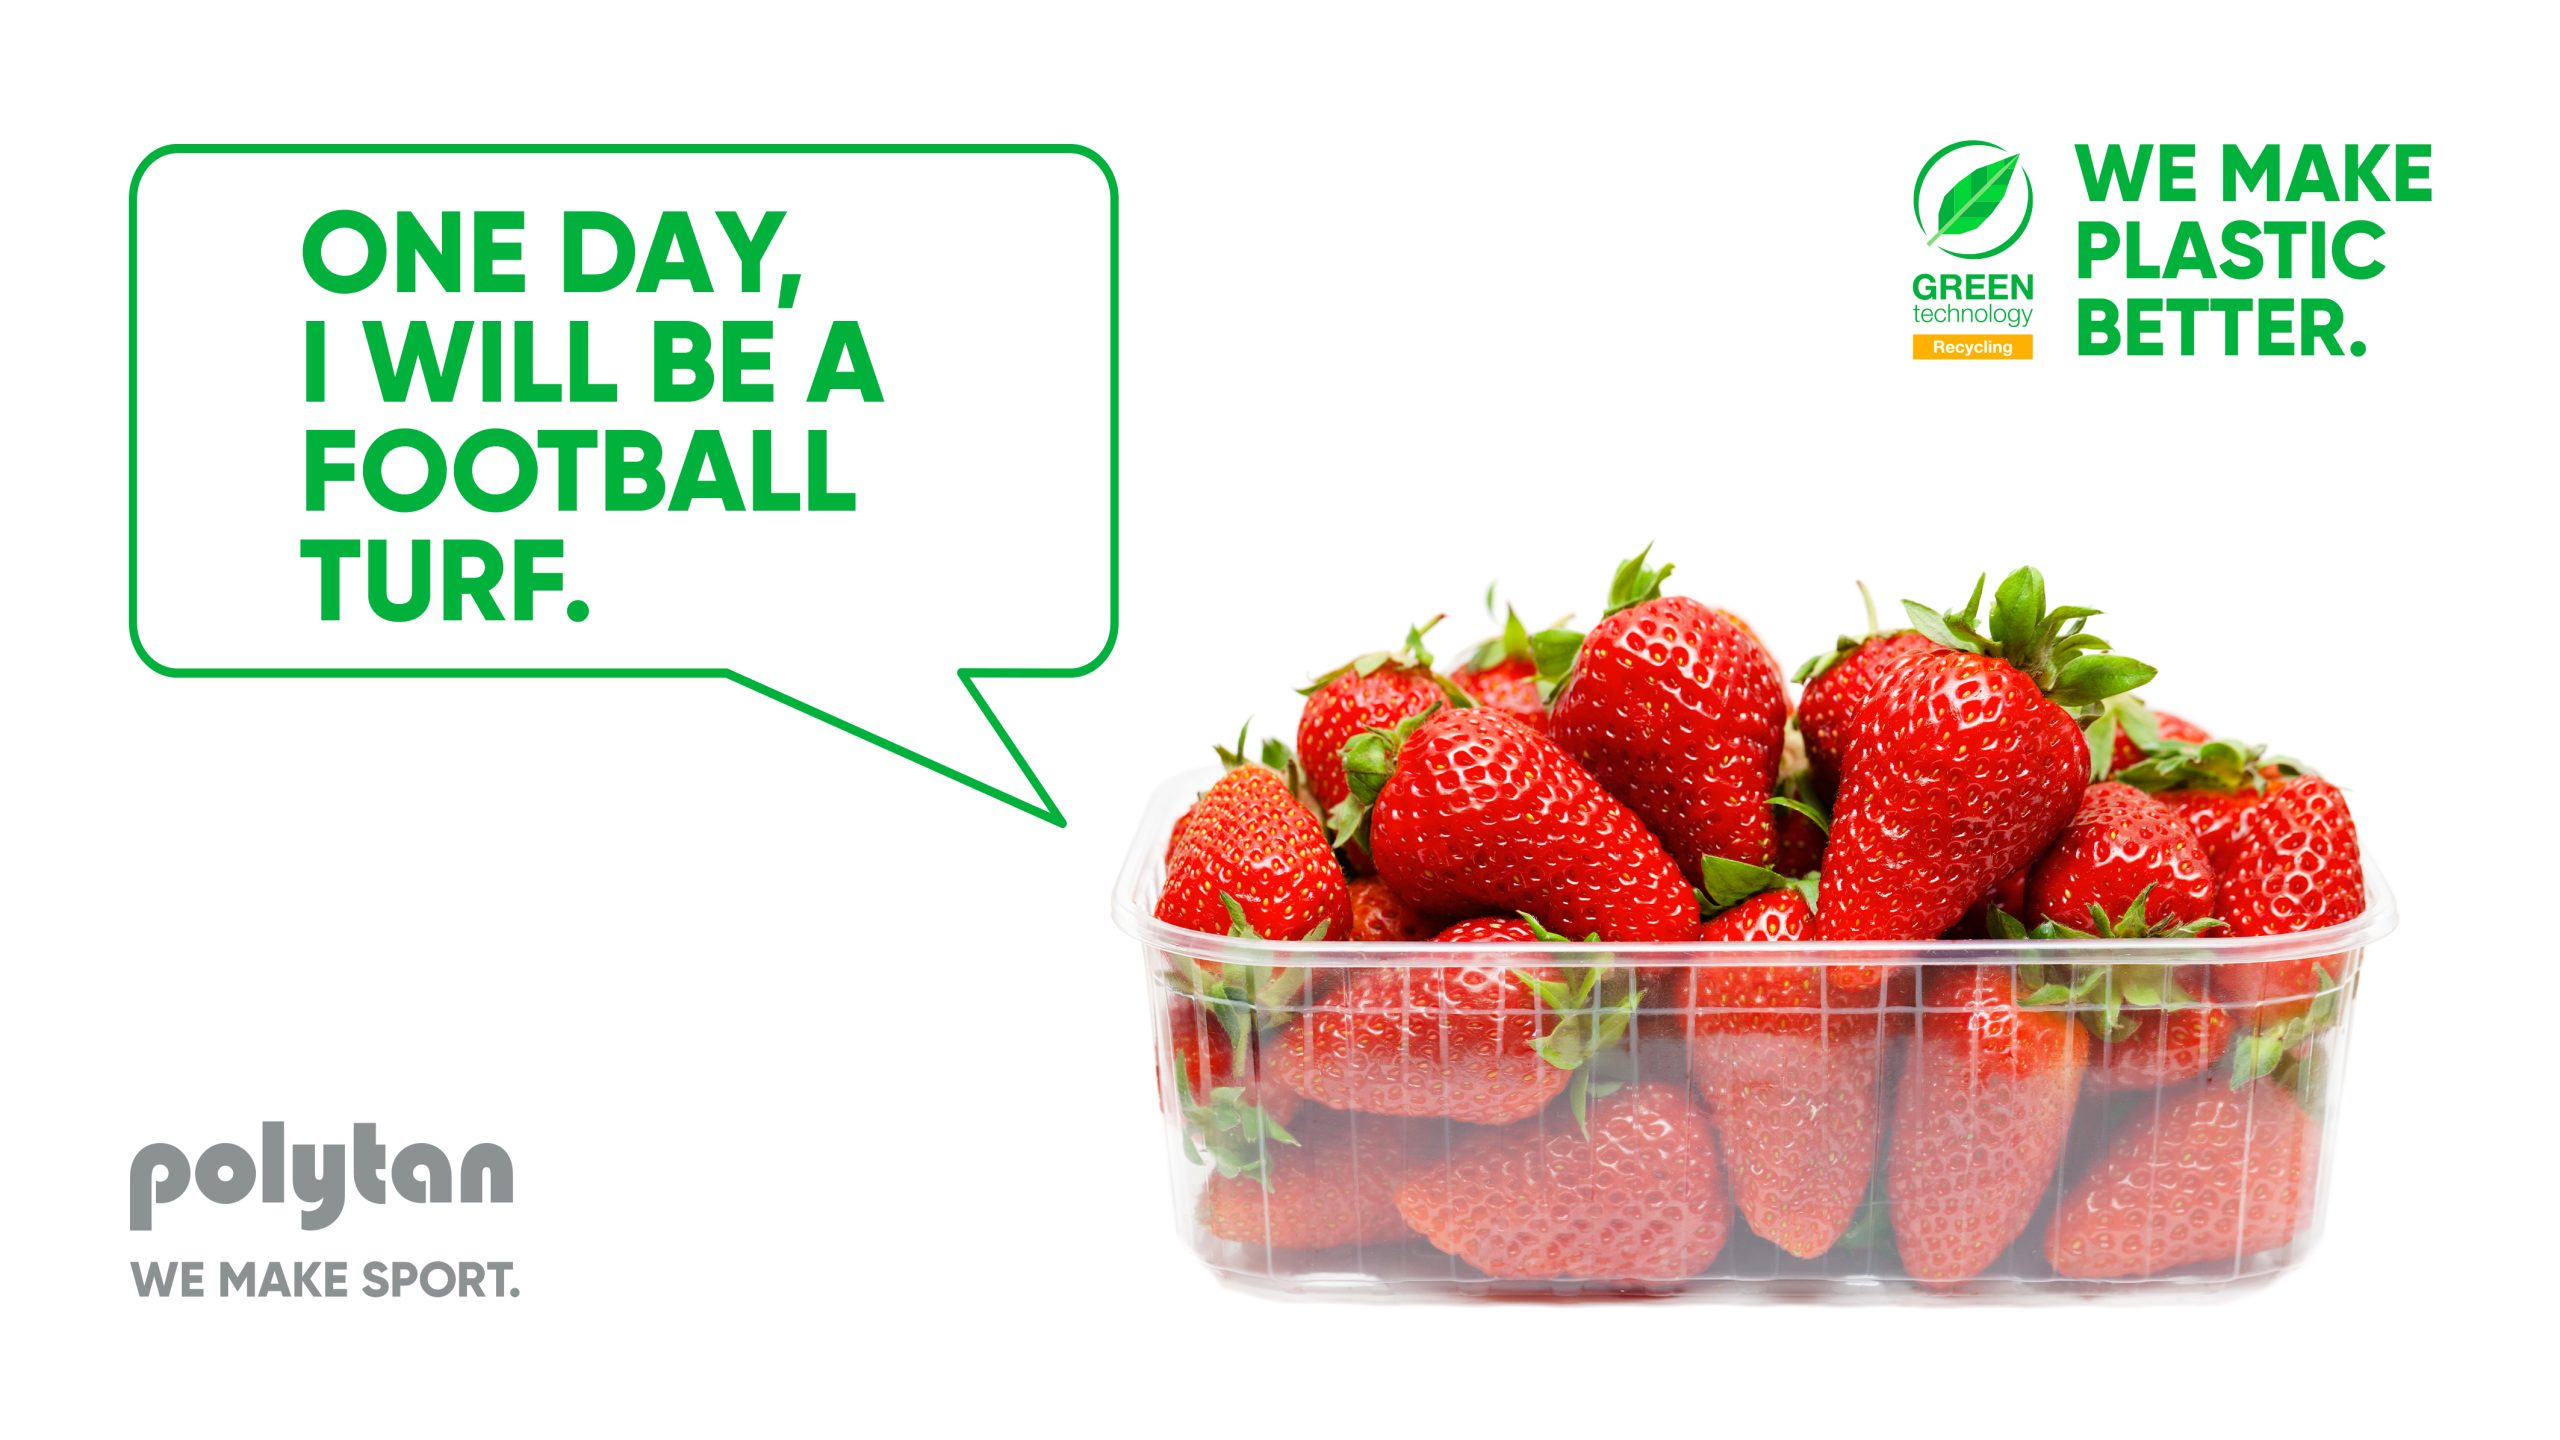 Recycling Visual "Strawberries" - one day I will be a football turf.